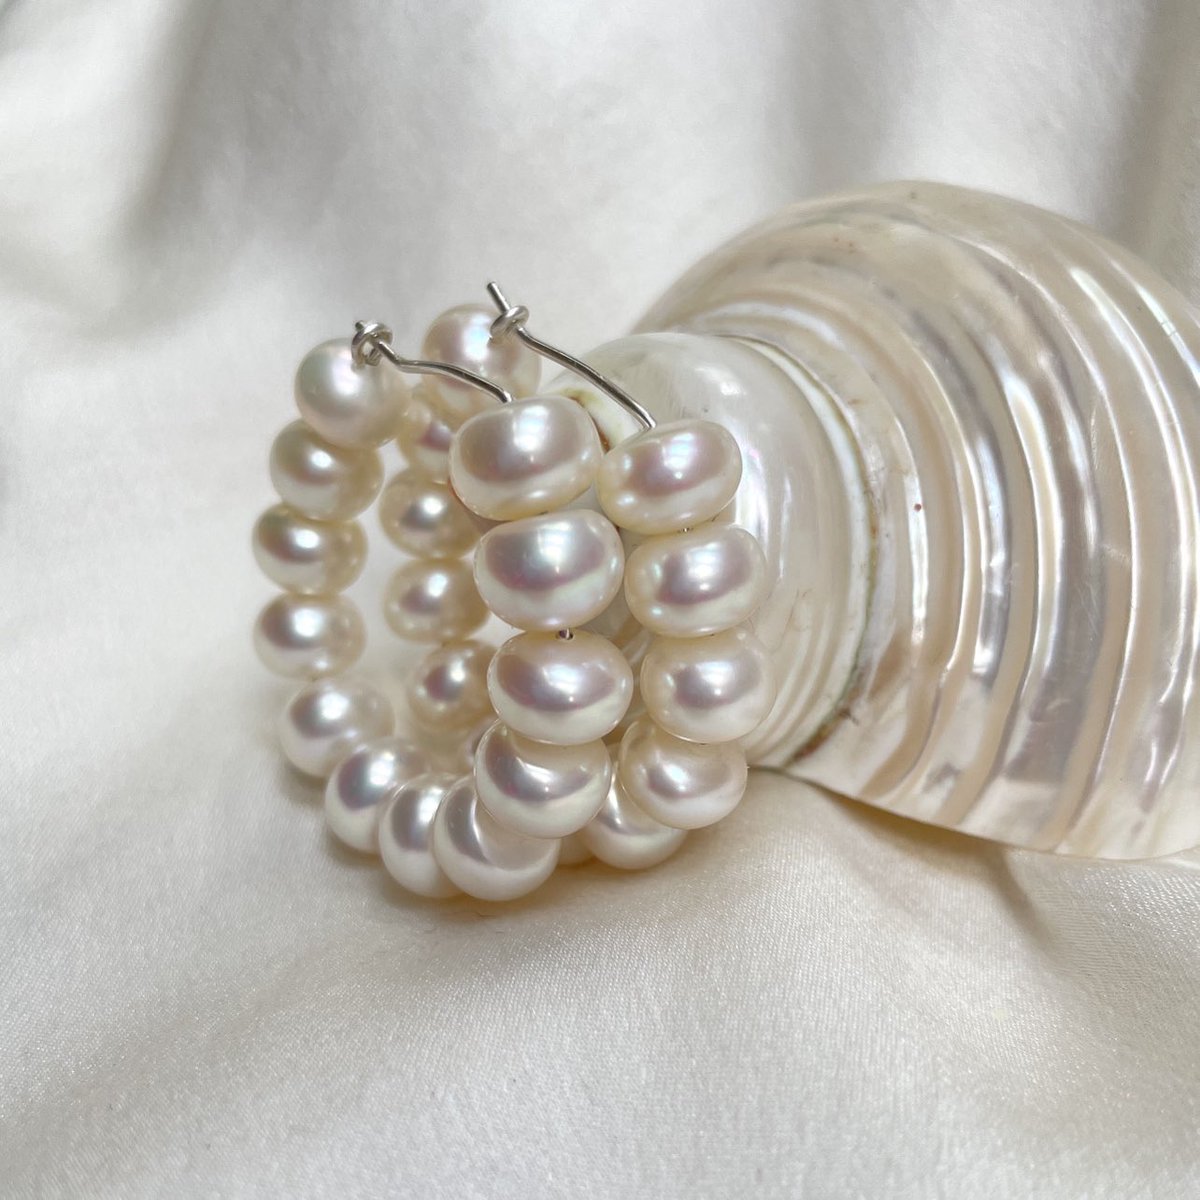 I absolutely love the lustre of these stunning pearls. 

naimapearls.etsy.com/listing/173762…

#pearlearrings #statementearrings #handmade #streetstyle